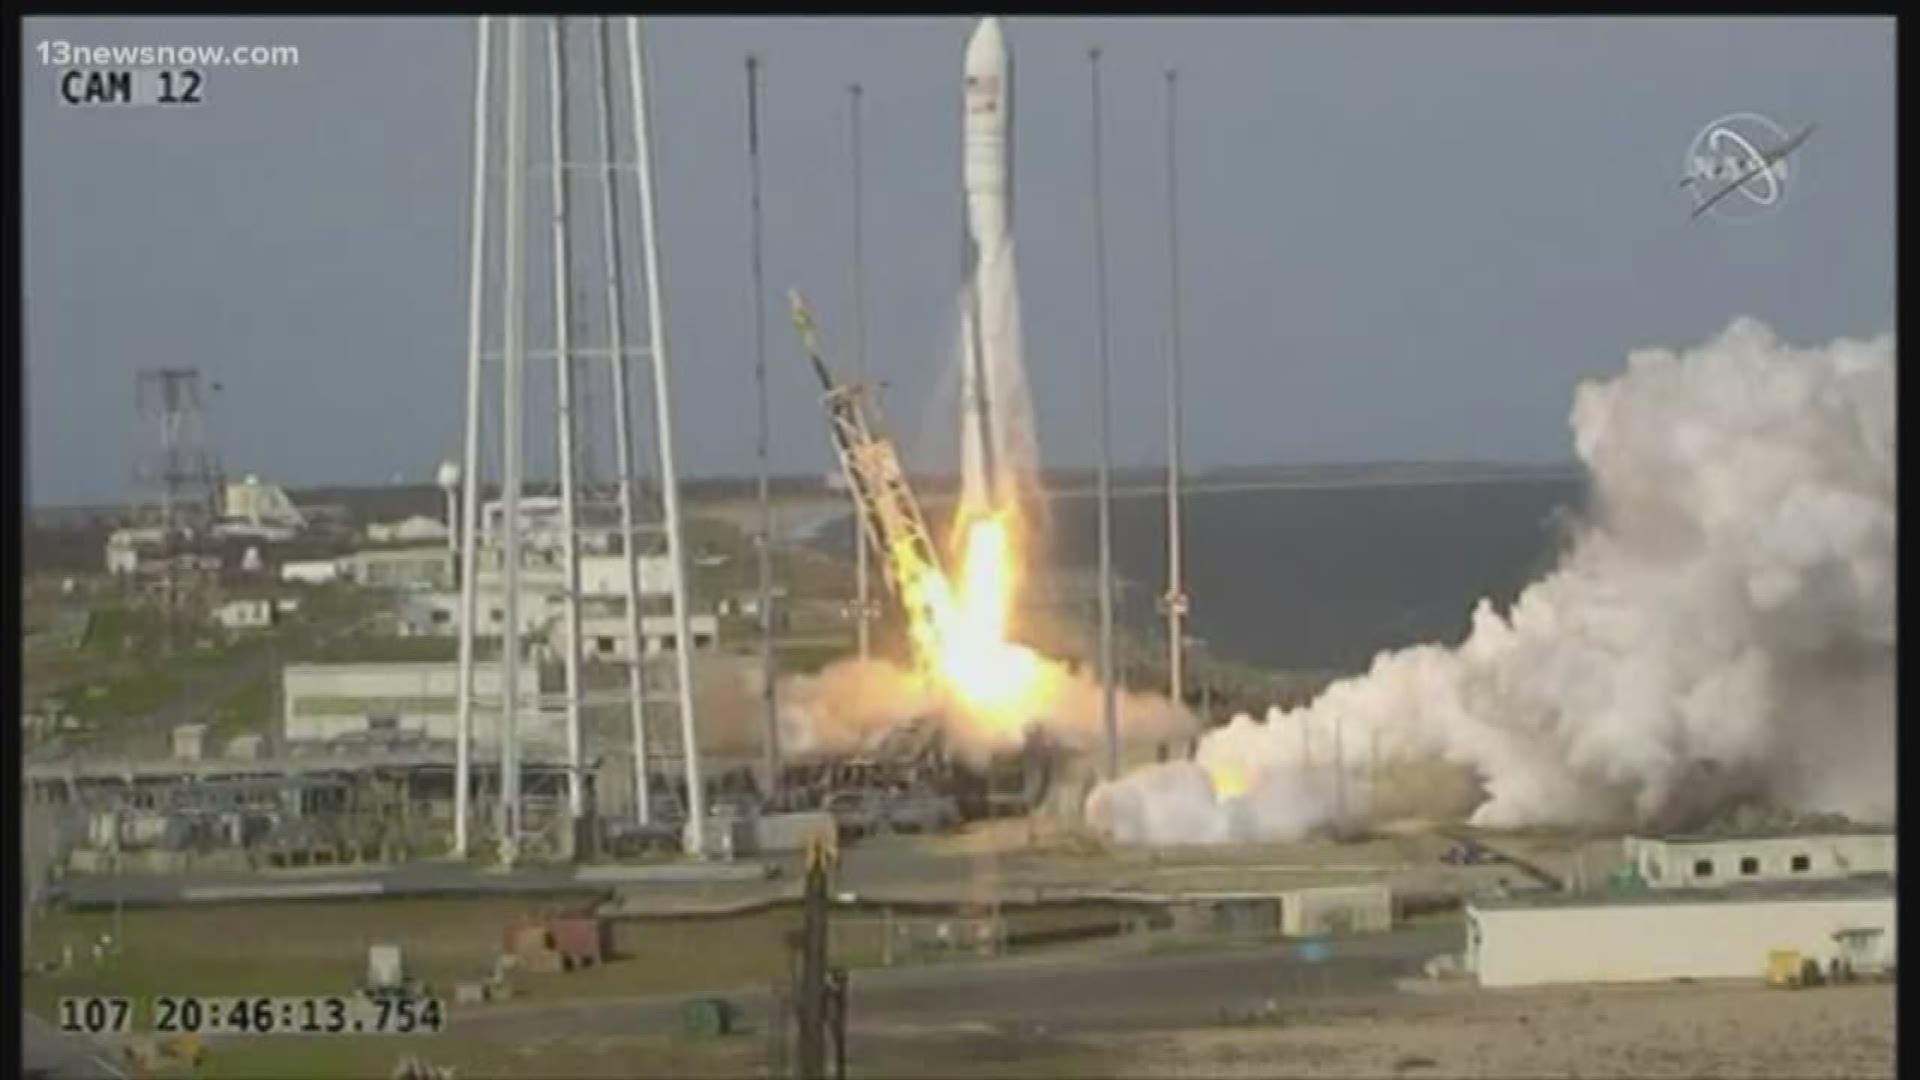 The rocket is headed to the International Space Station on a supply mission.